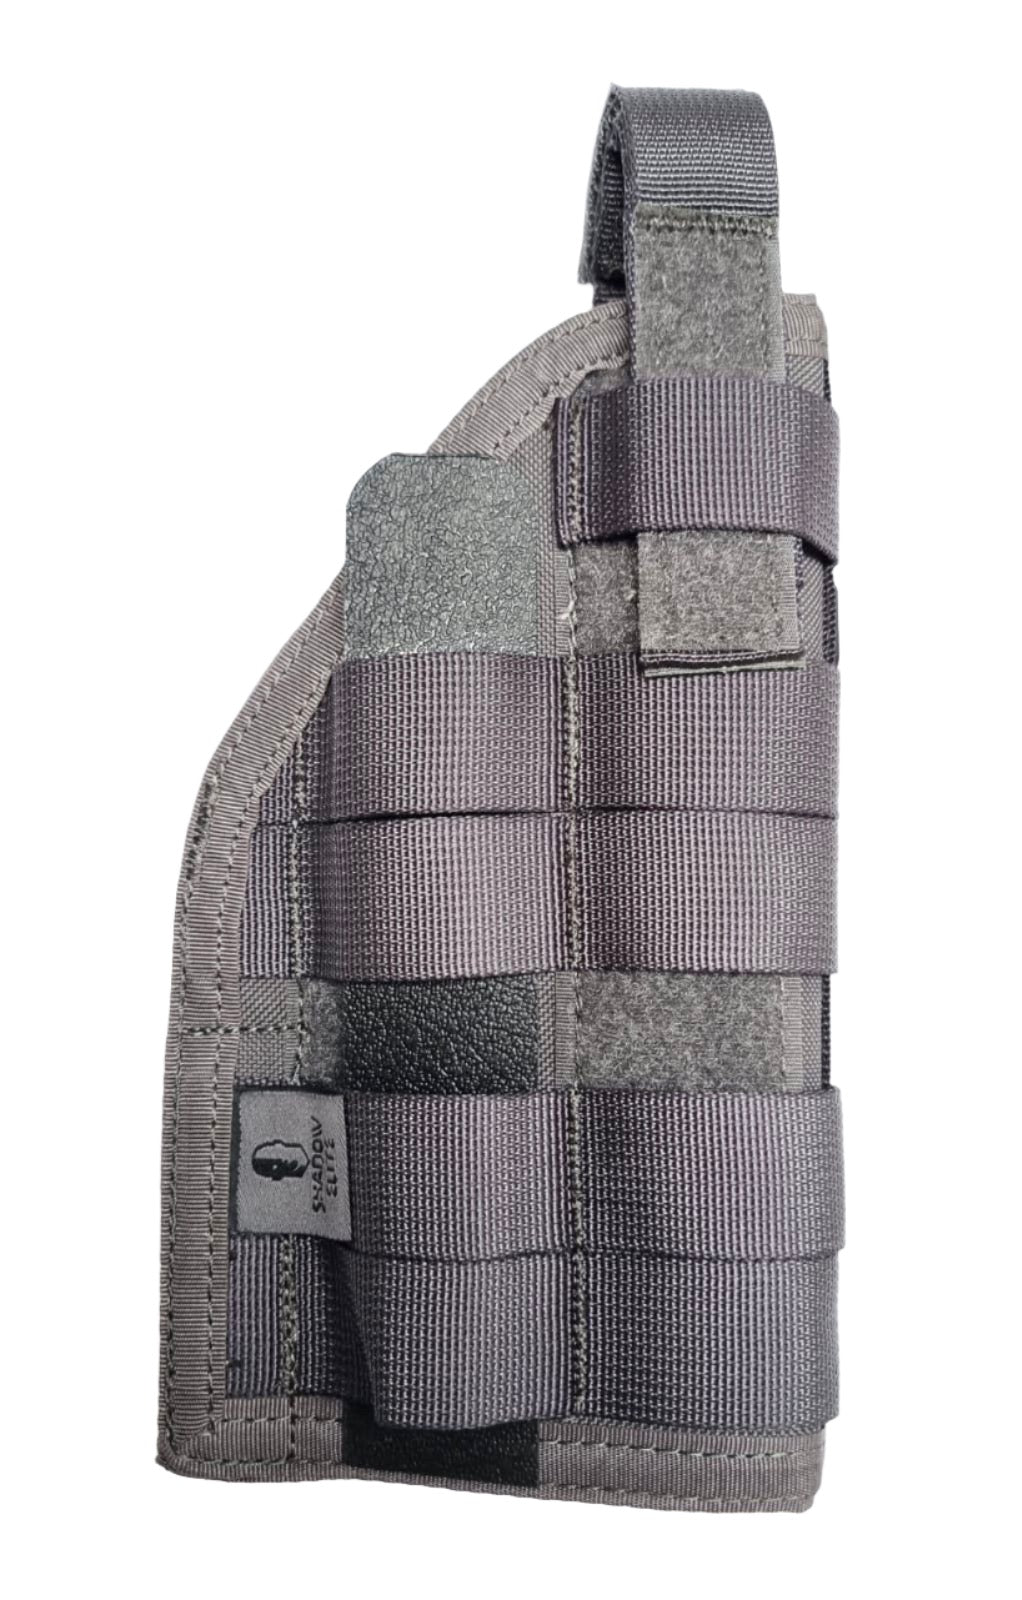 SHE-714 Camouflage Molle Pistol Holster Colour Silver Grey.